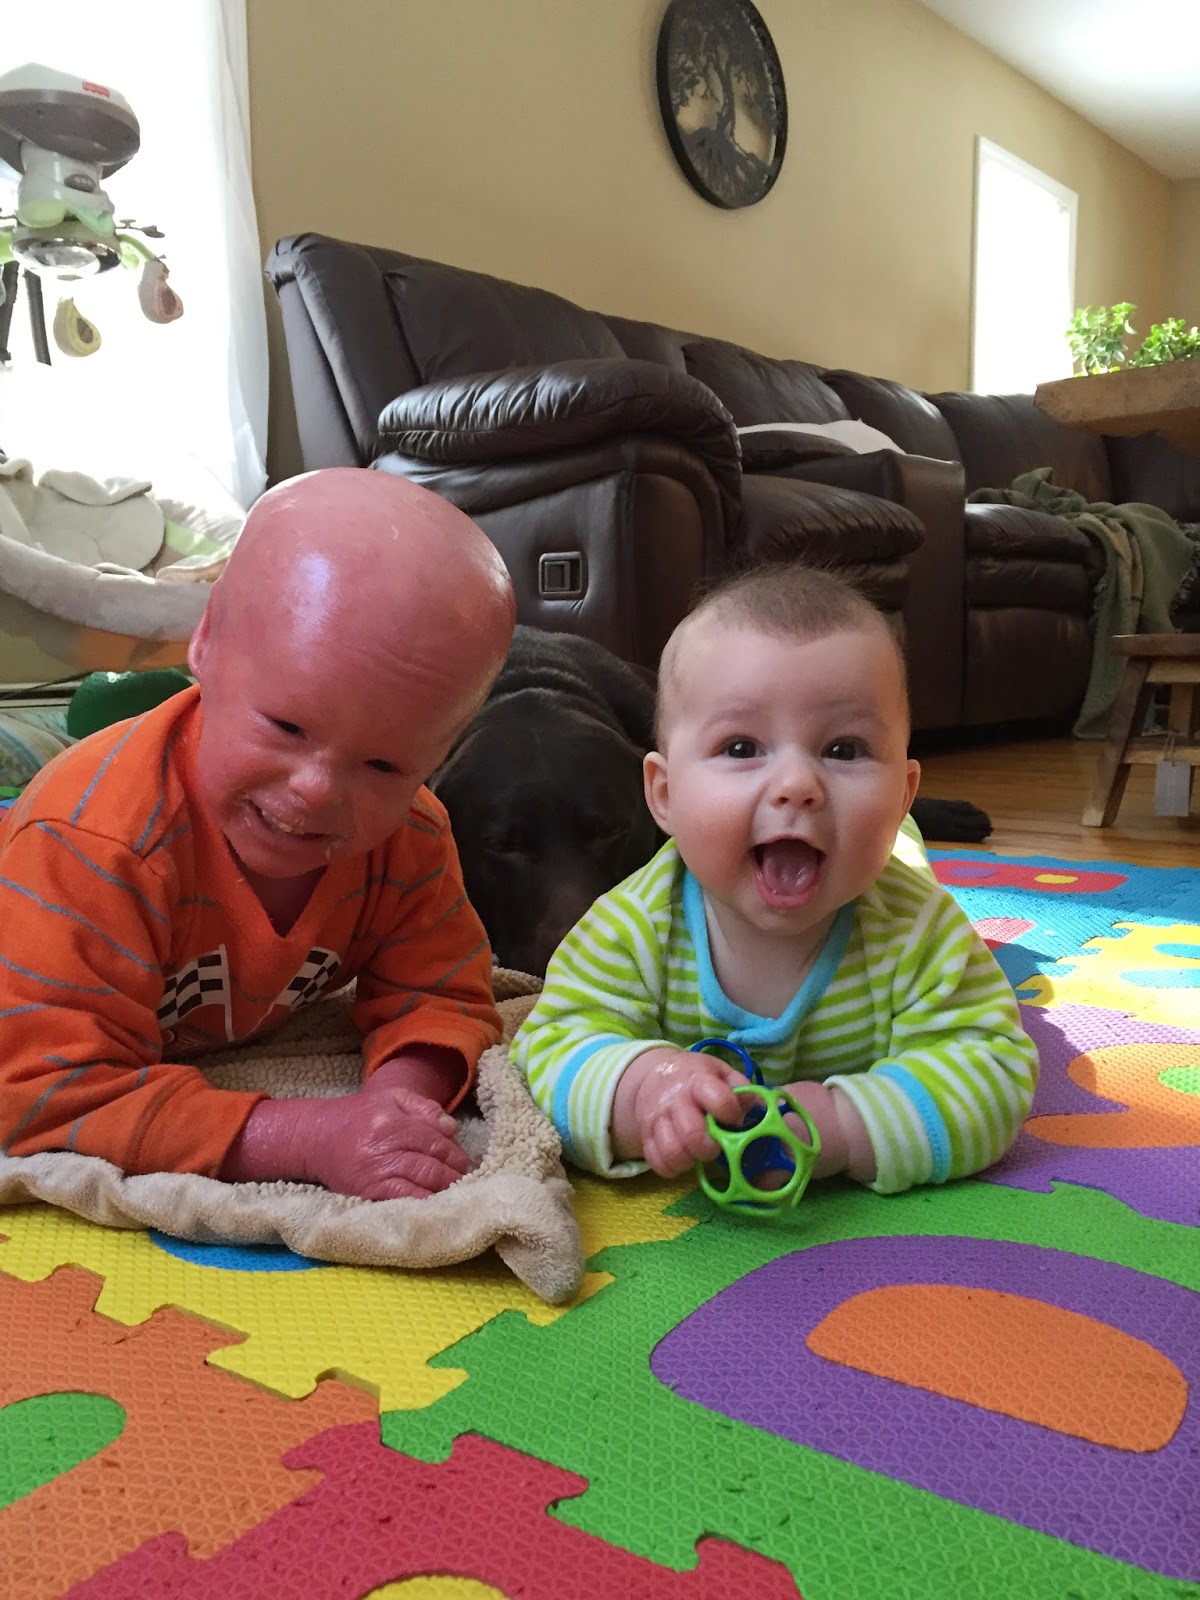 Evan, who has Harlequin Ichthyosis, with his brother